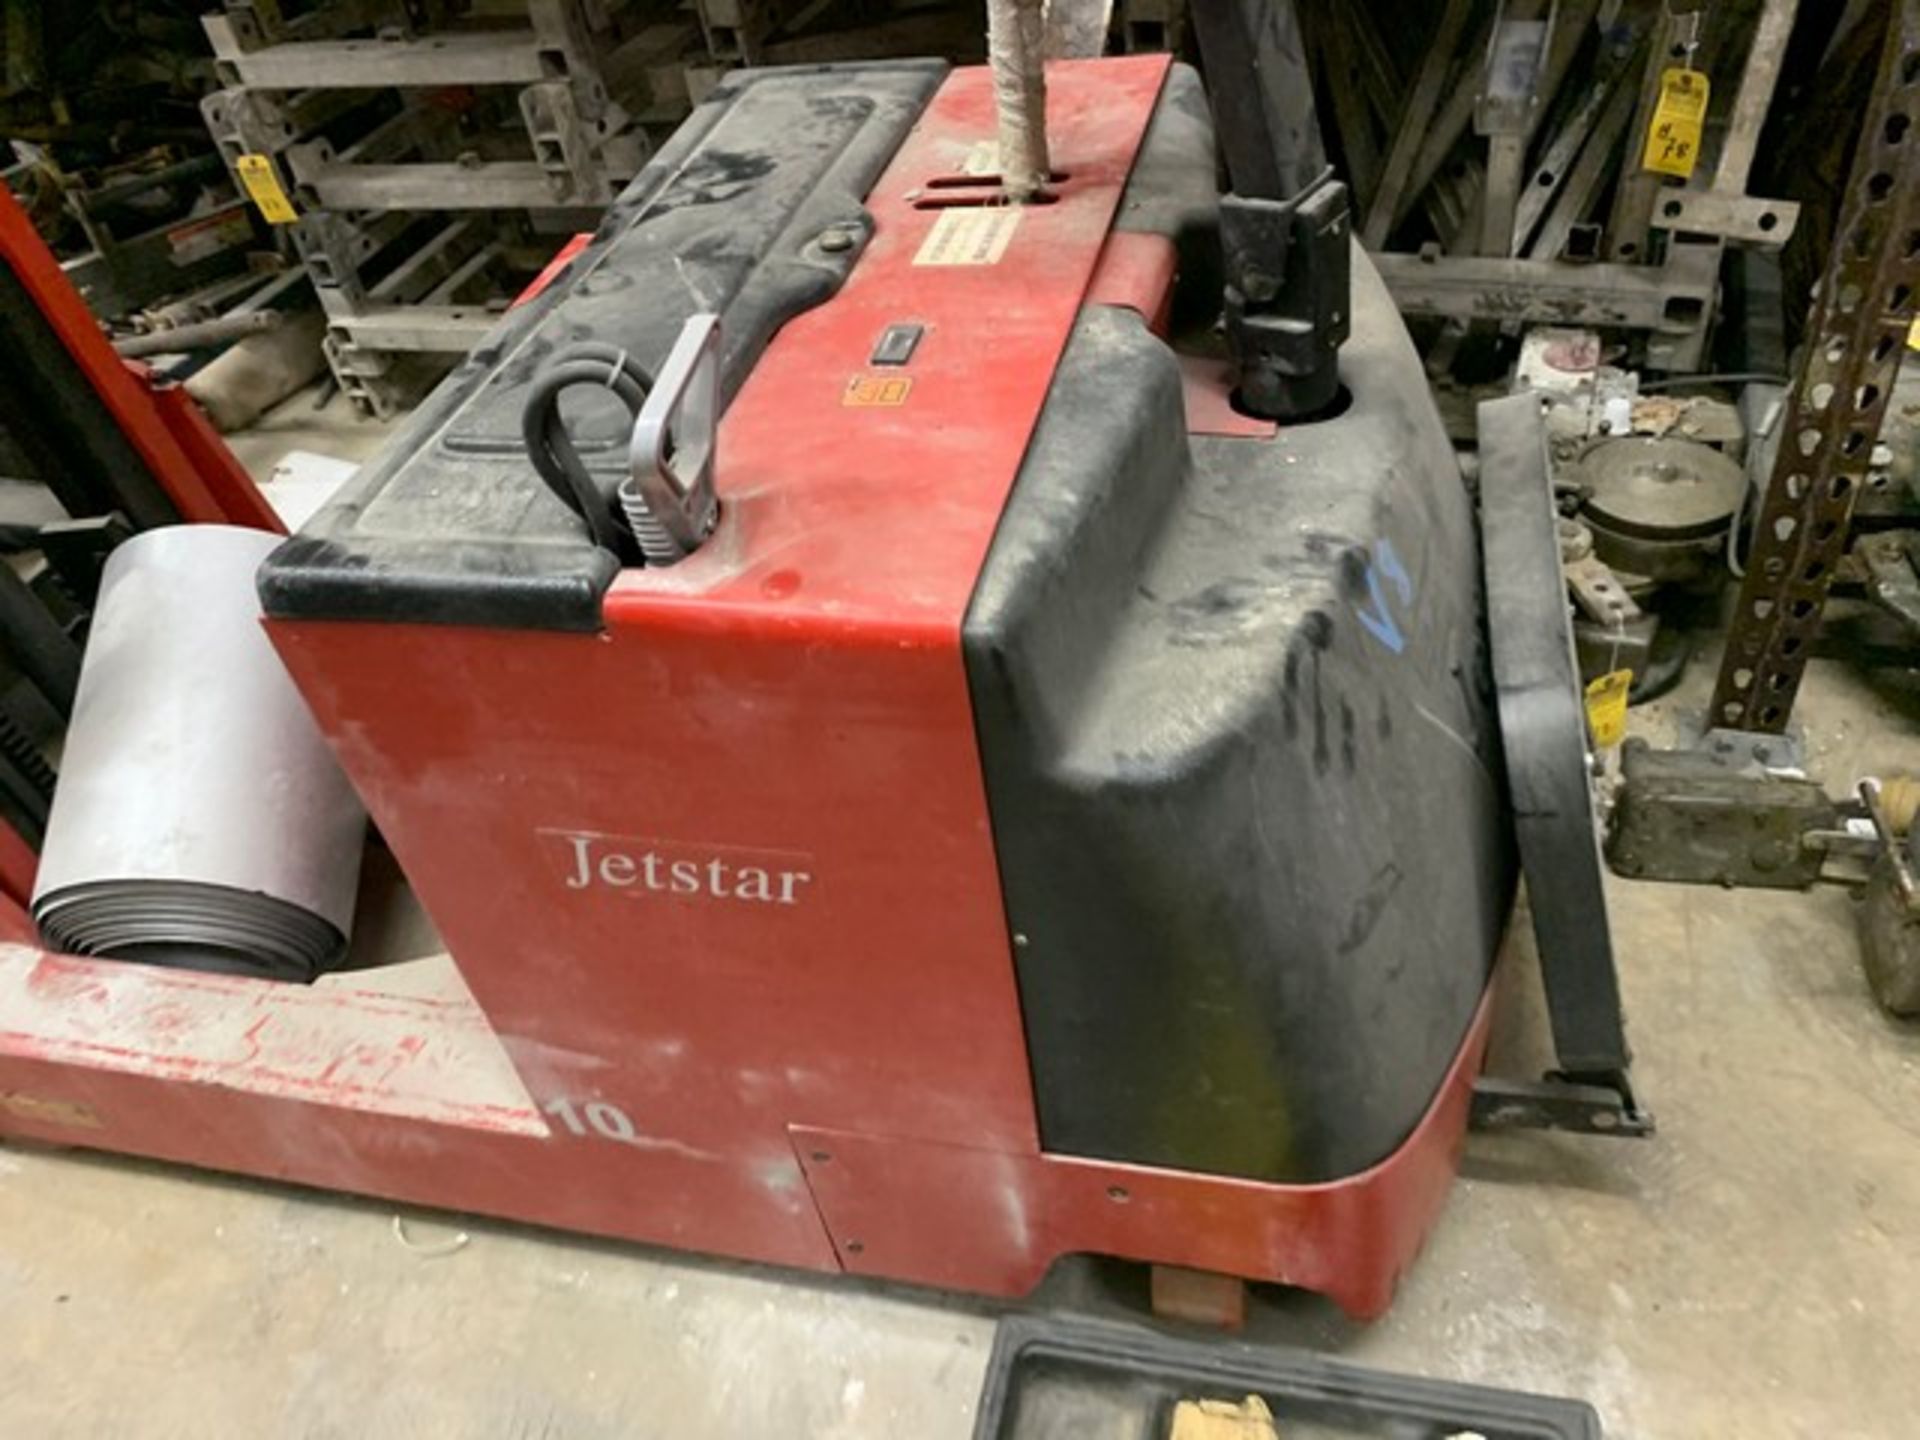 JETSTAR ELECTRIC LIFT TRUCK - 2 STAGE - Image 2 of 4